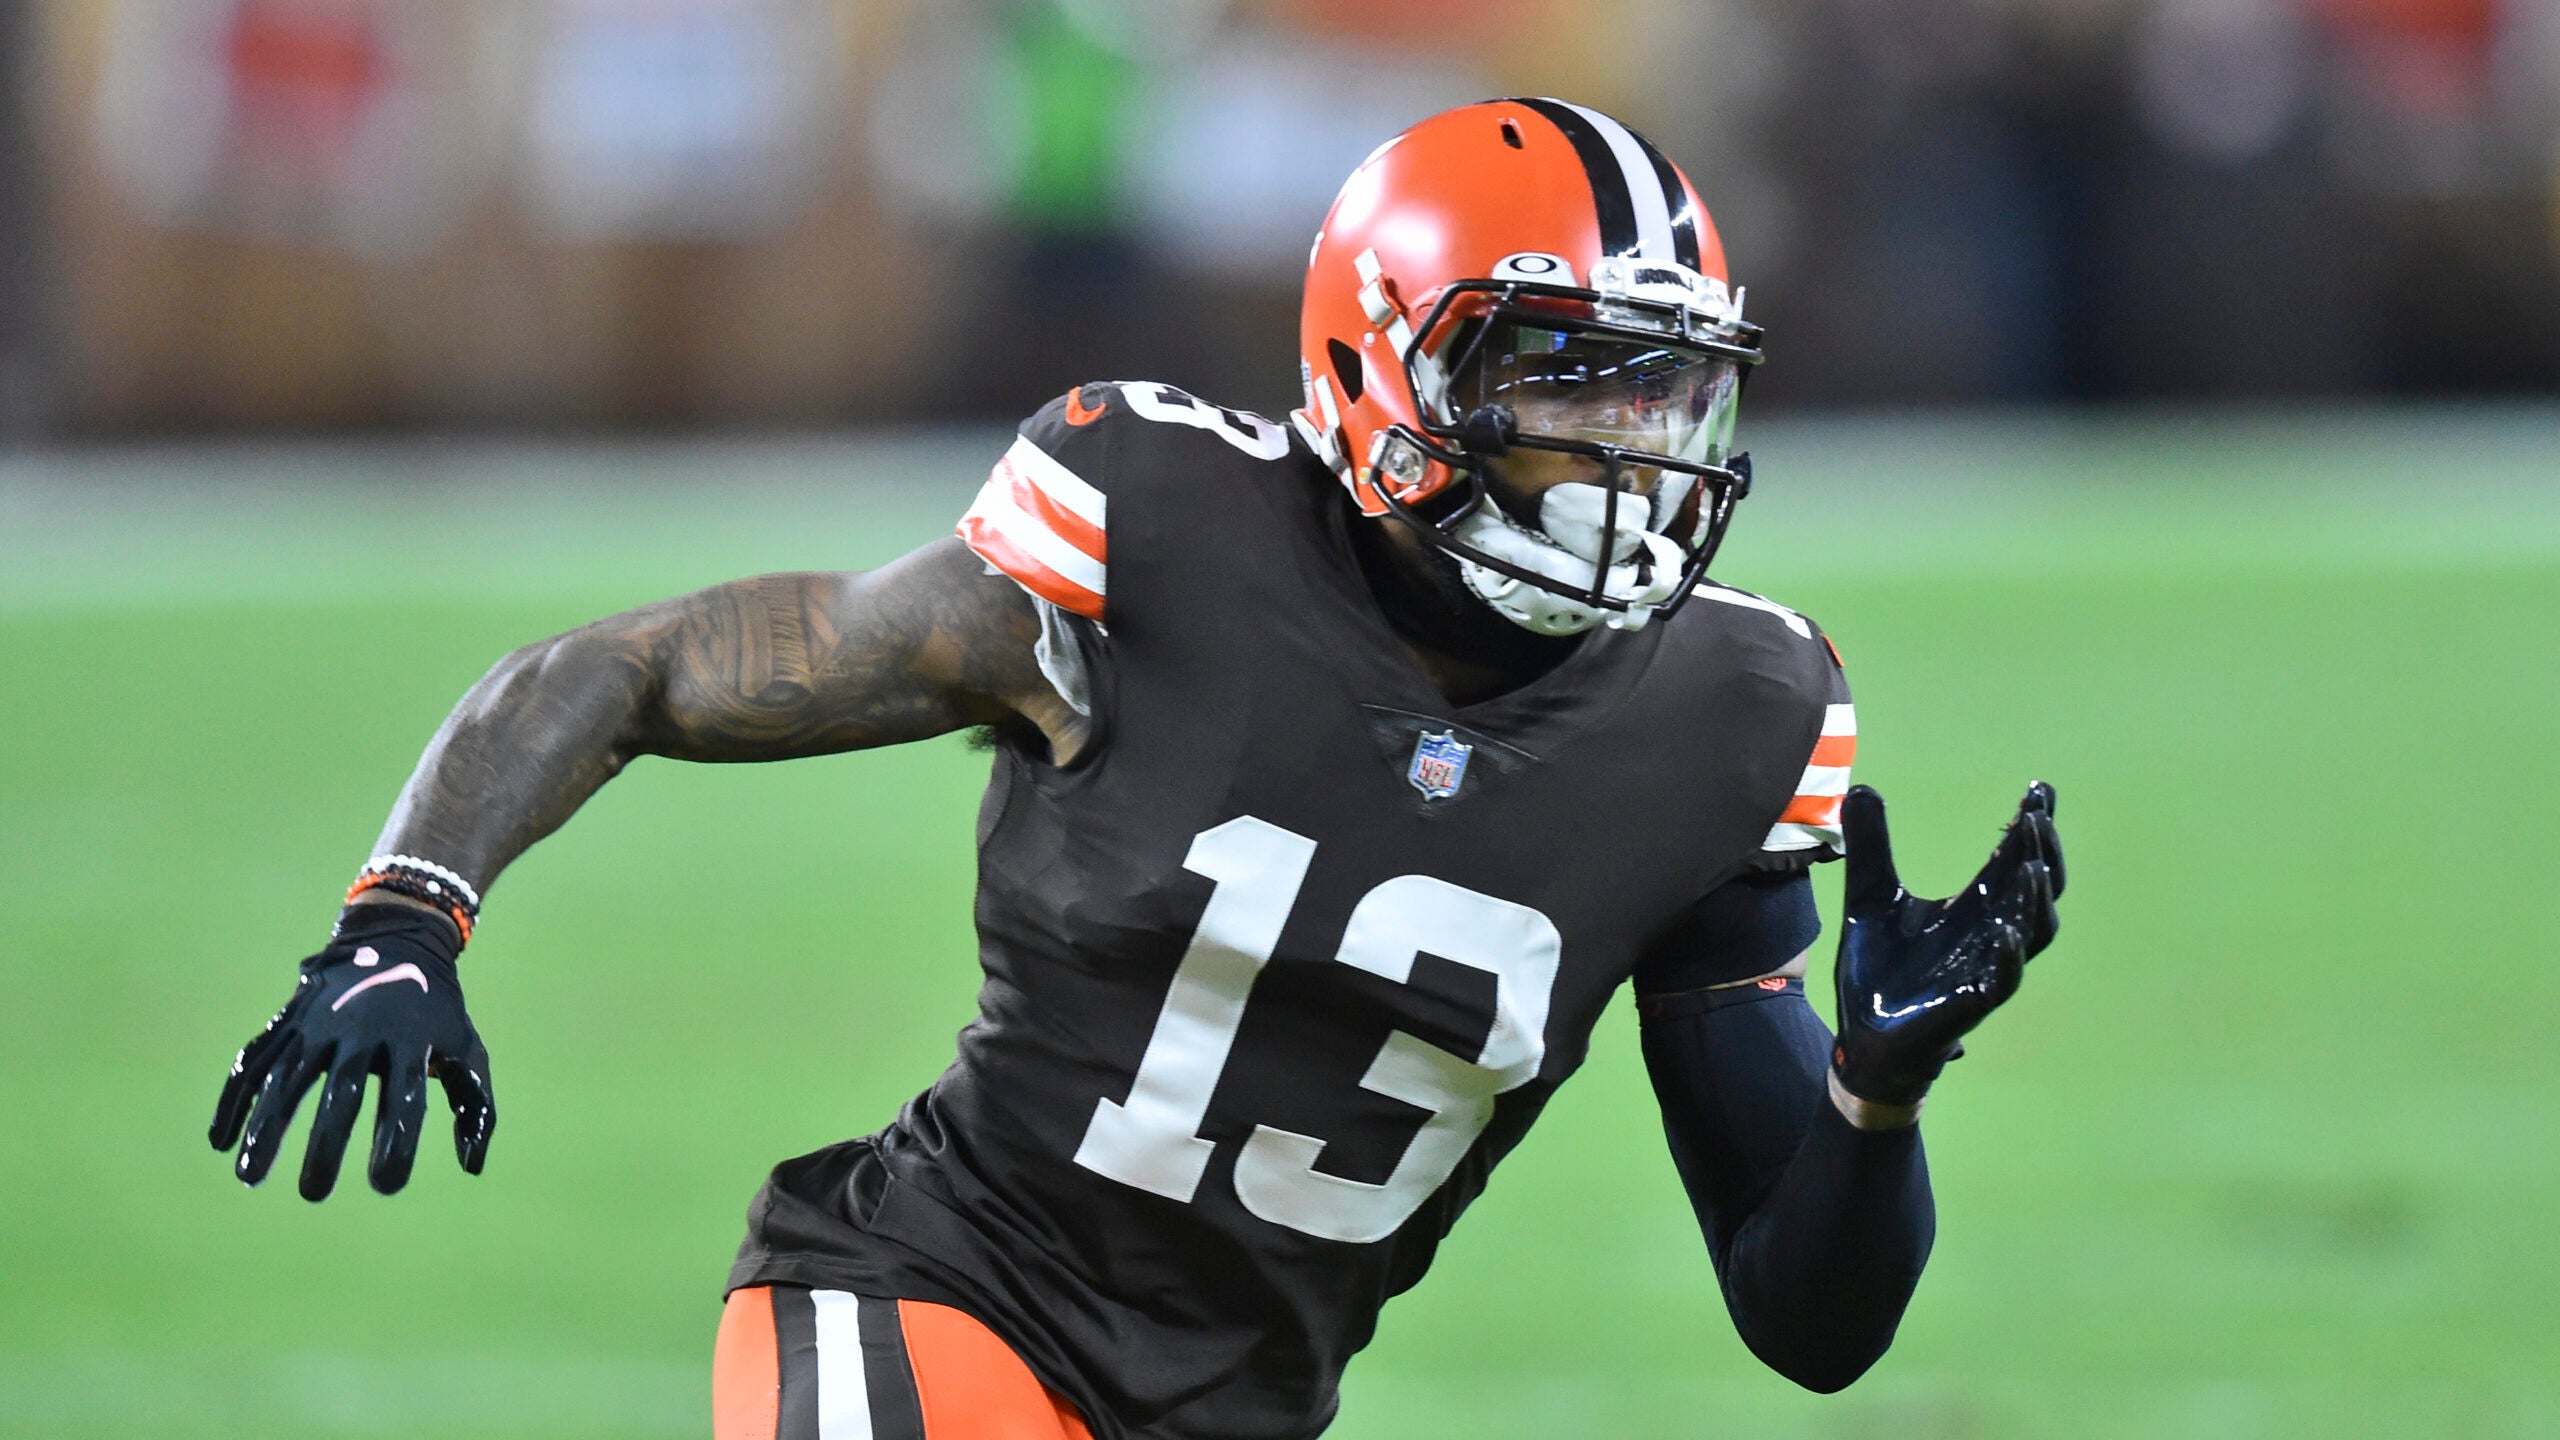 Will Odell Beckham Jr. bounce back with a big season for the Browns?